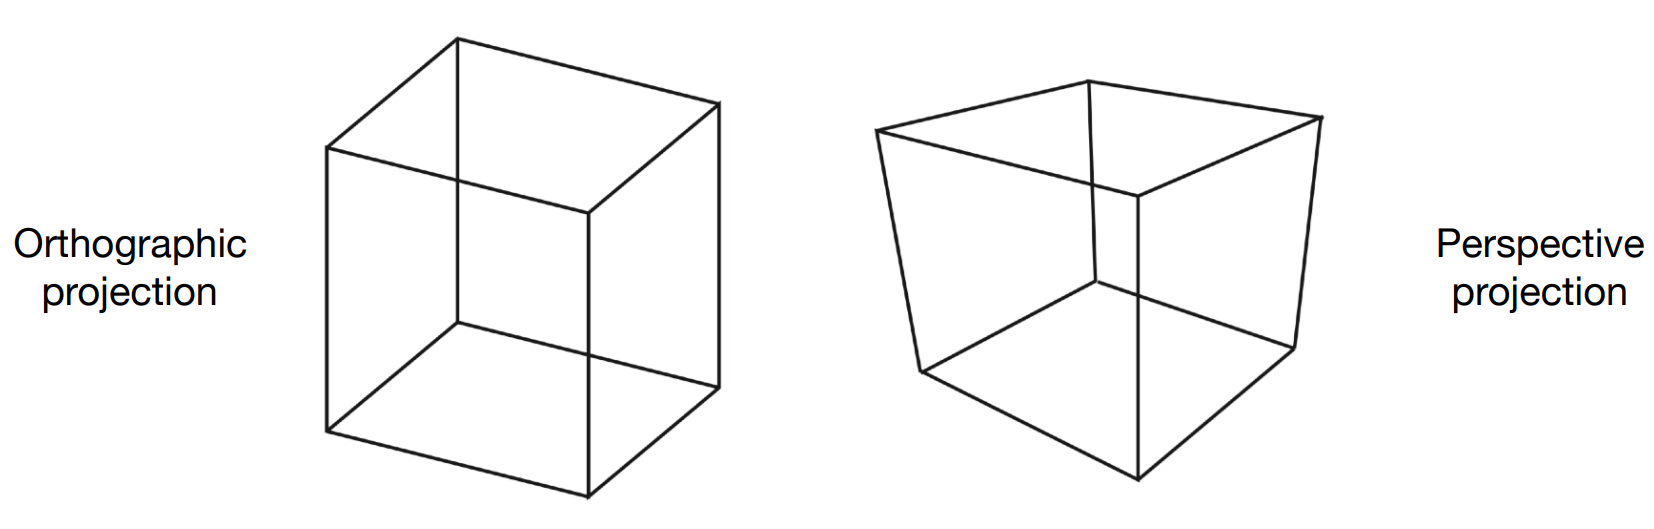 Fig. 7.1 from Fundamentals of Computer Graphics, 4th Edition